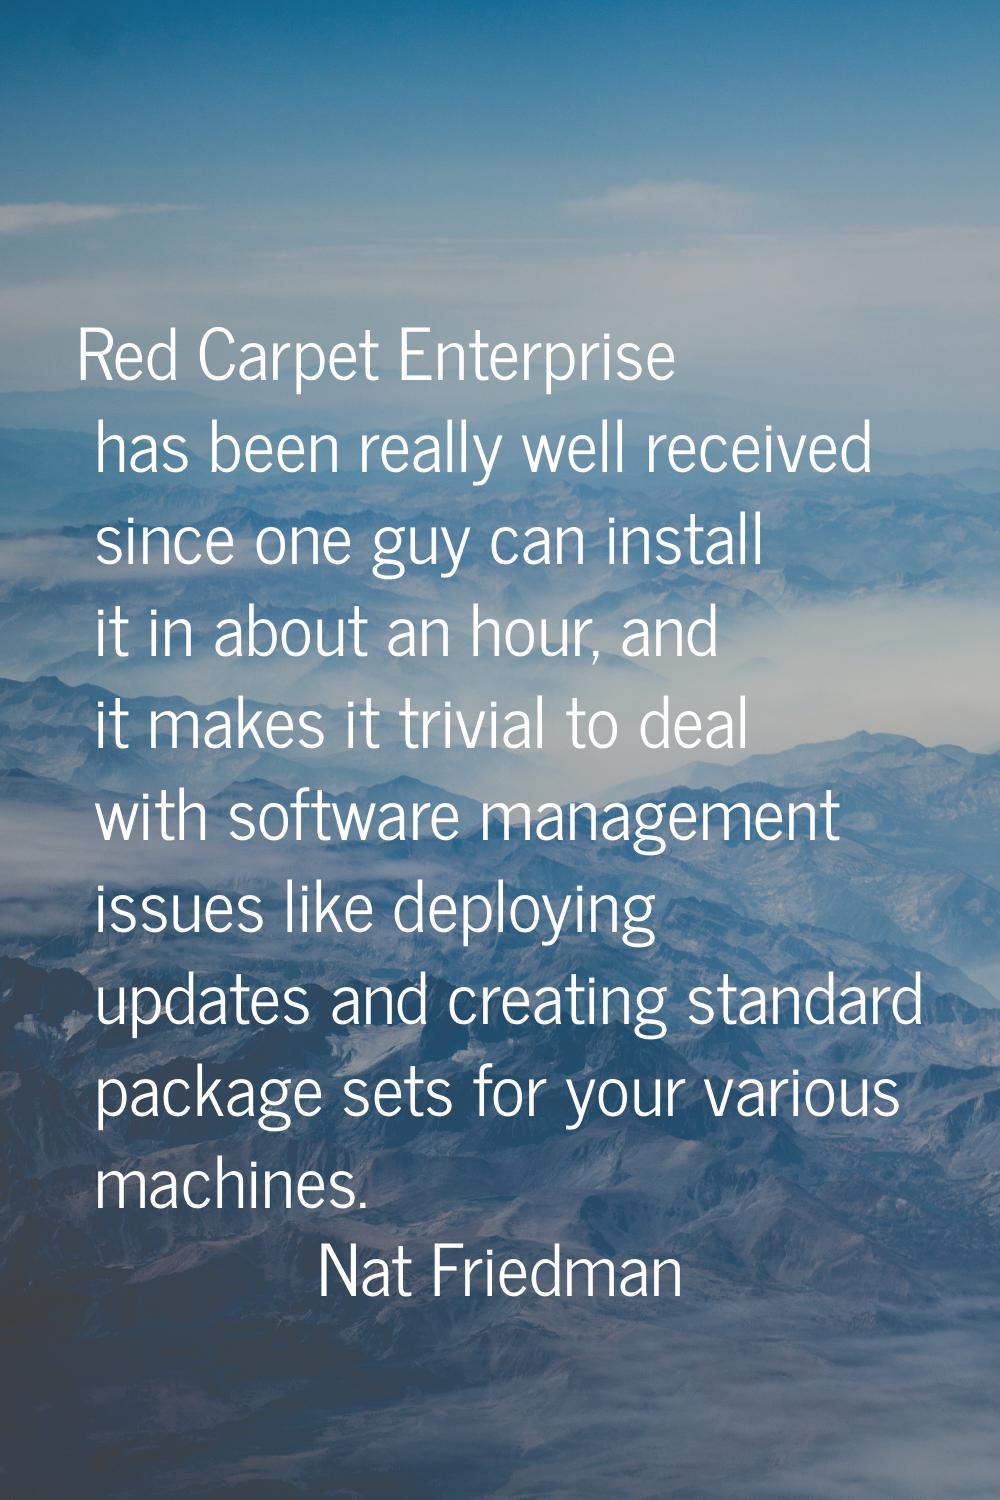 Red Carpet Enterprise has been really well received since one guy can install it in about an hour, 